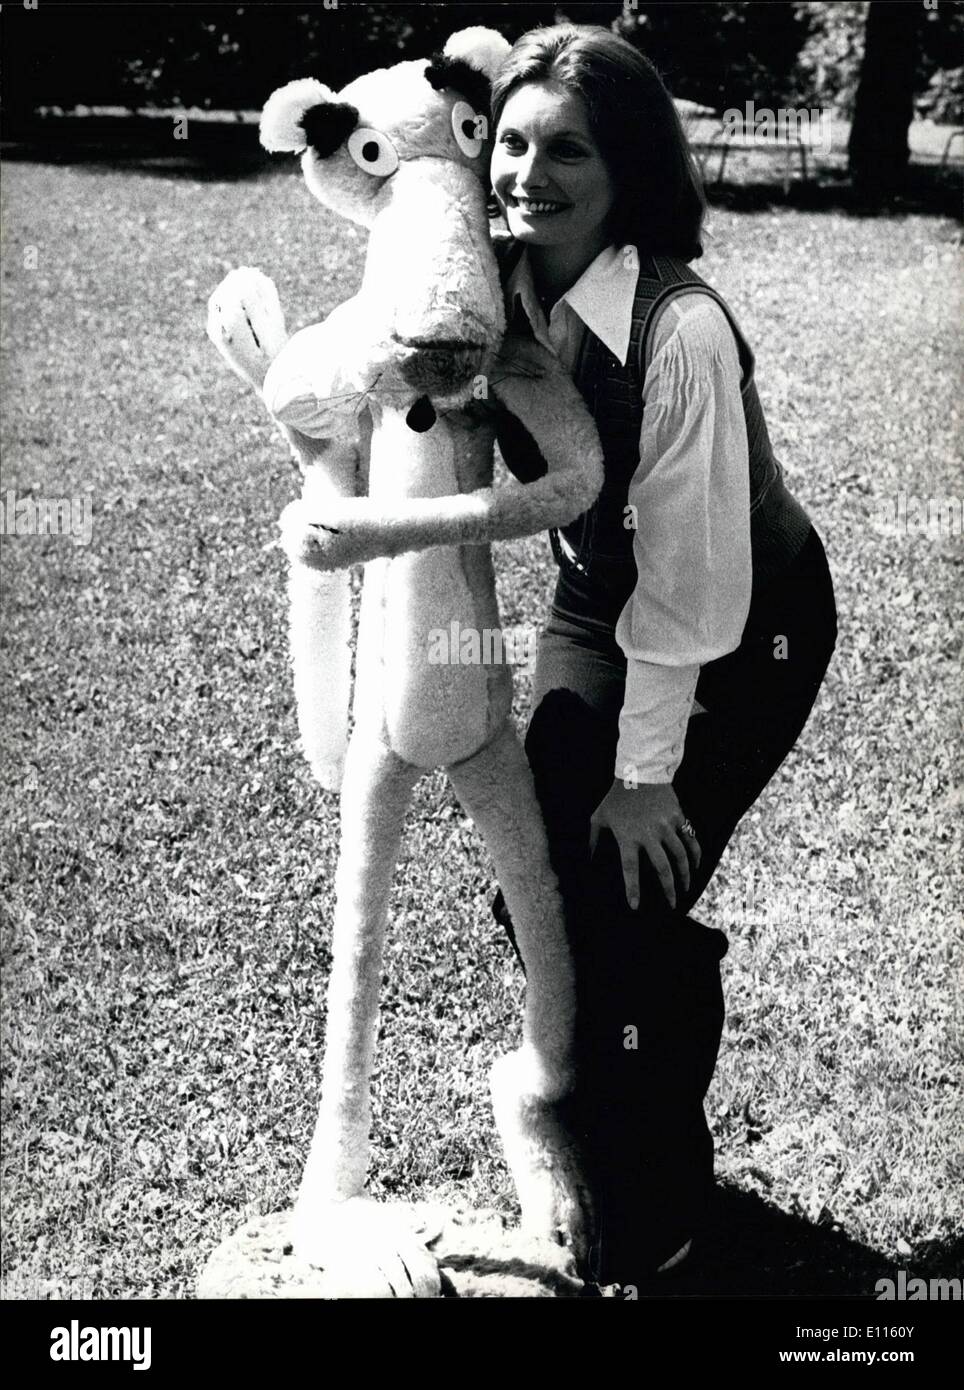 Sep. 09, 1975 - The Return of the Pink Panther . In Gstaad there was the presentation of the new film The Return of the Pink Panther with Peter Sellers and Catherine Schell. OPS: Catherine Schell holds the Pink Panther, it isn't dangerous, really. Keystone Zurich 75-9-15 Stock Photo